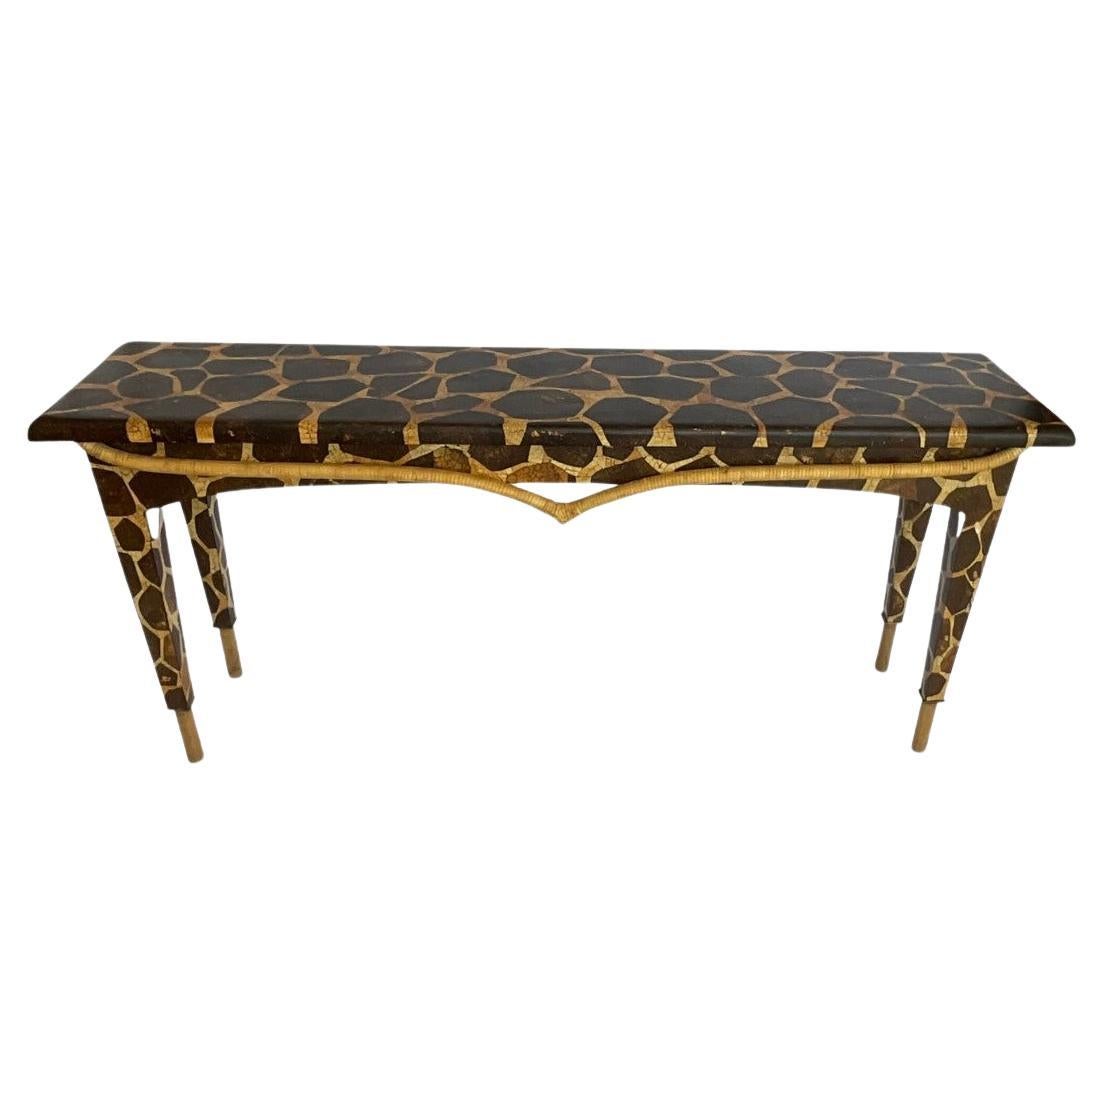 Tessellated Coconut Shell Giraffe Motif Console Table For Sale